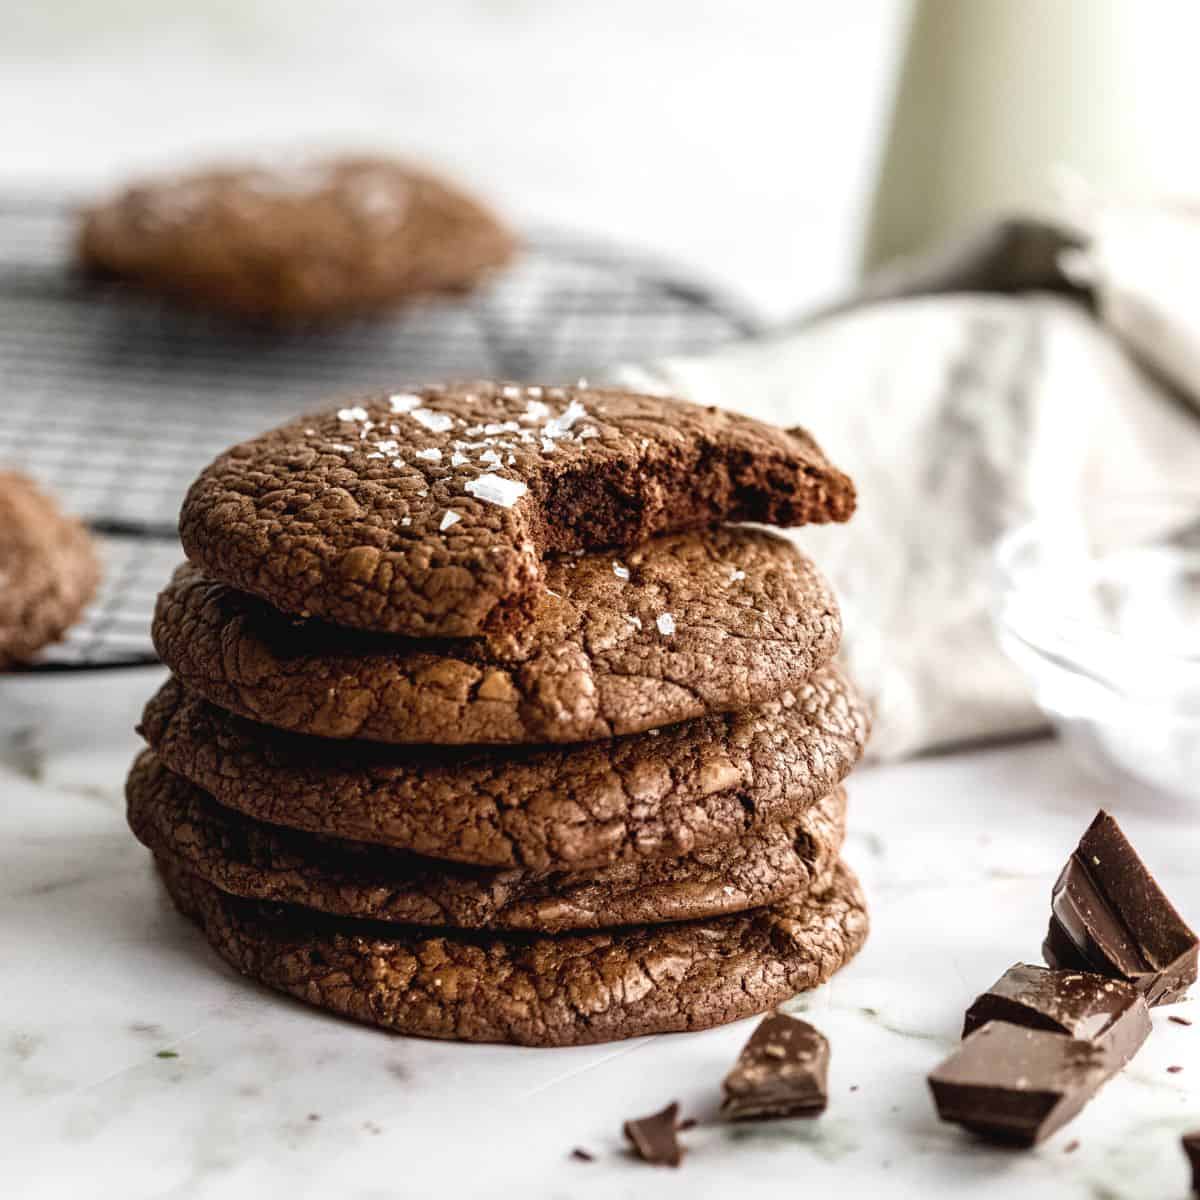 Sugar Free Chewy Brownie Cookies, a simple and delicious dessert or snack recipe featuring fudgy brownies in a chewy cookie. LC Keto